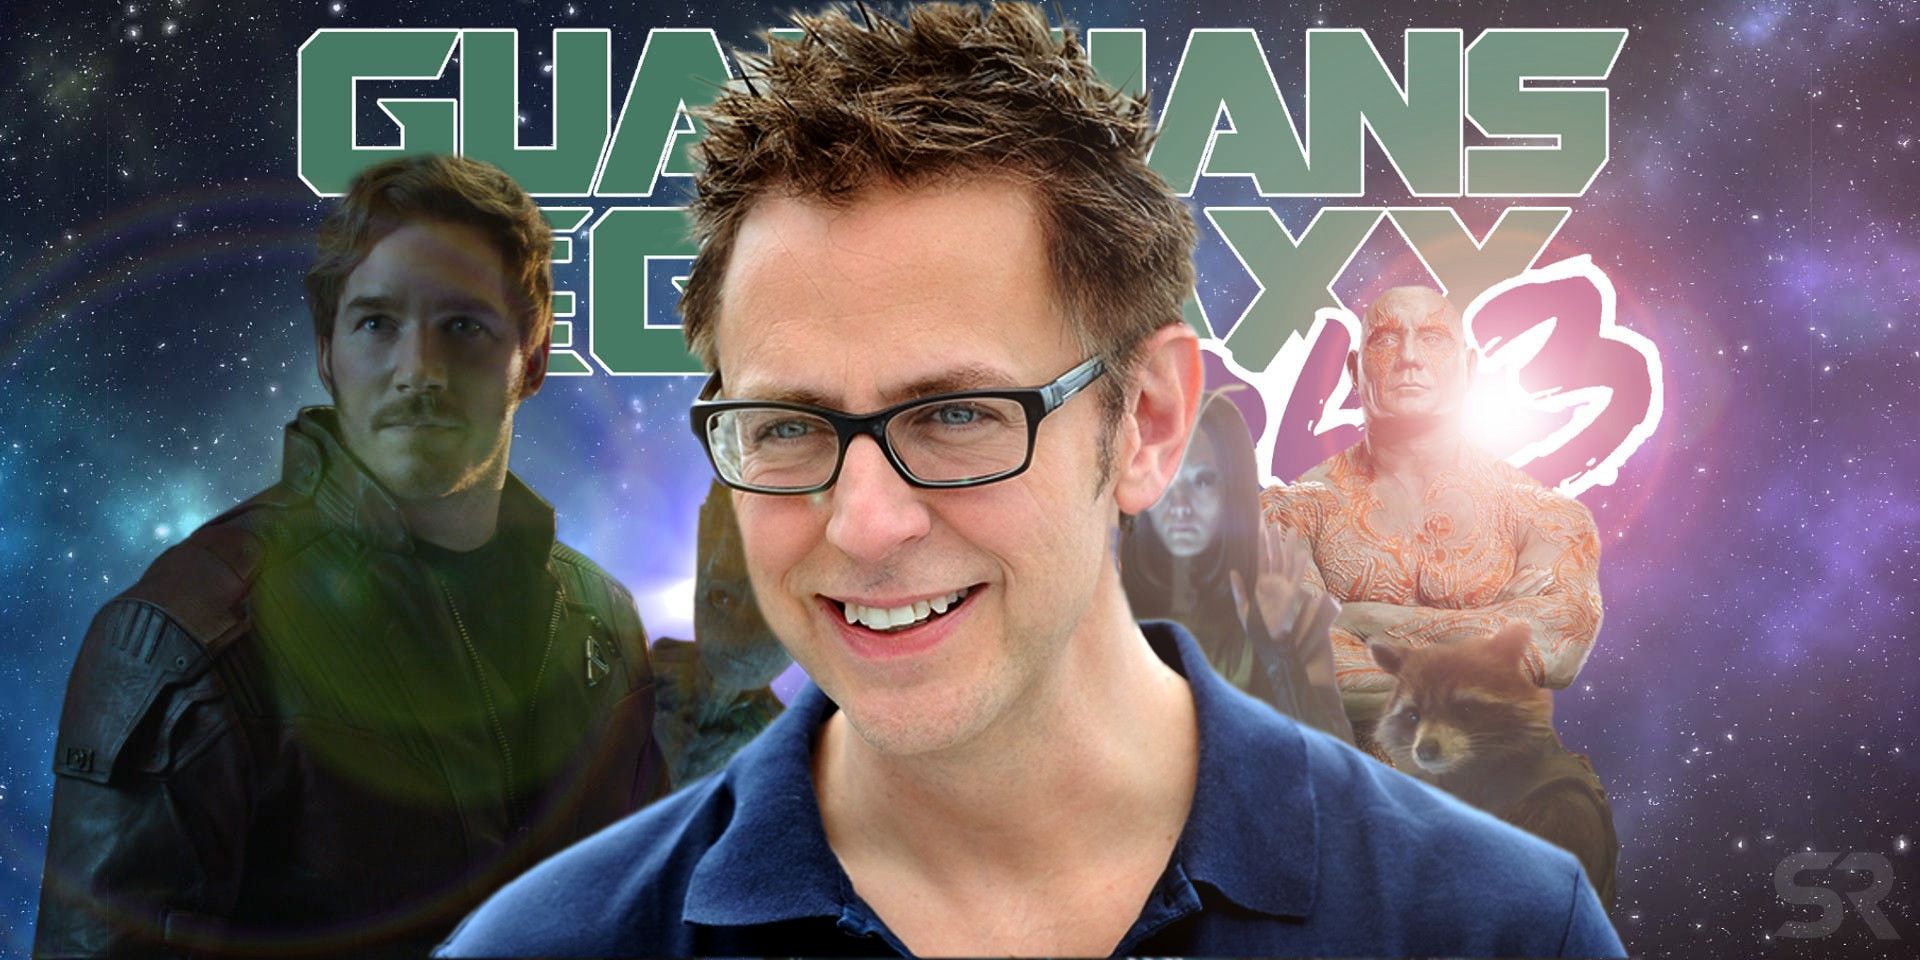 Why Disney Fired James Gunn as Director But Are Keeping Him as Writer